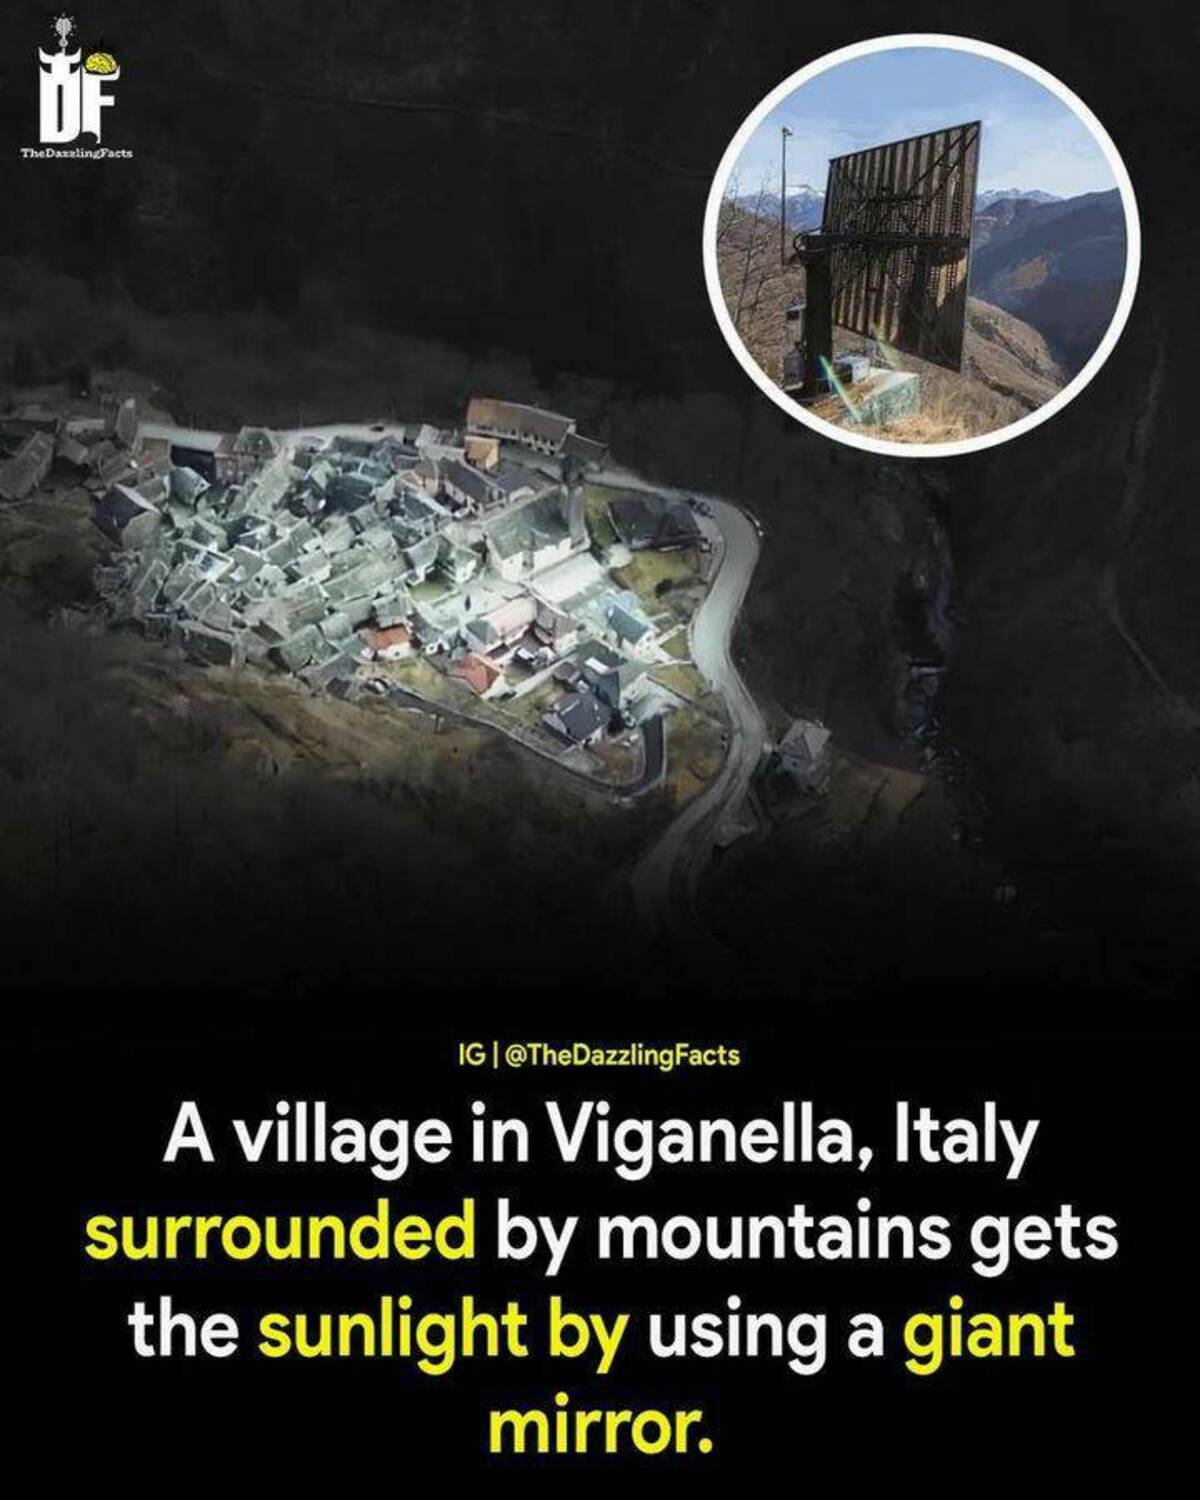 earth - Of The Dazzling Facts Ig A village in Viganella, Italy surrounded by mountains gets the sunlight by using a giant mirror.